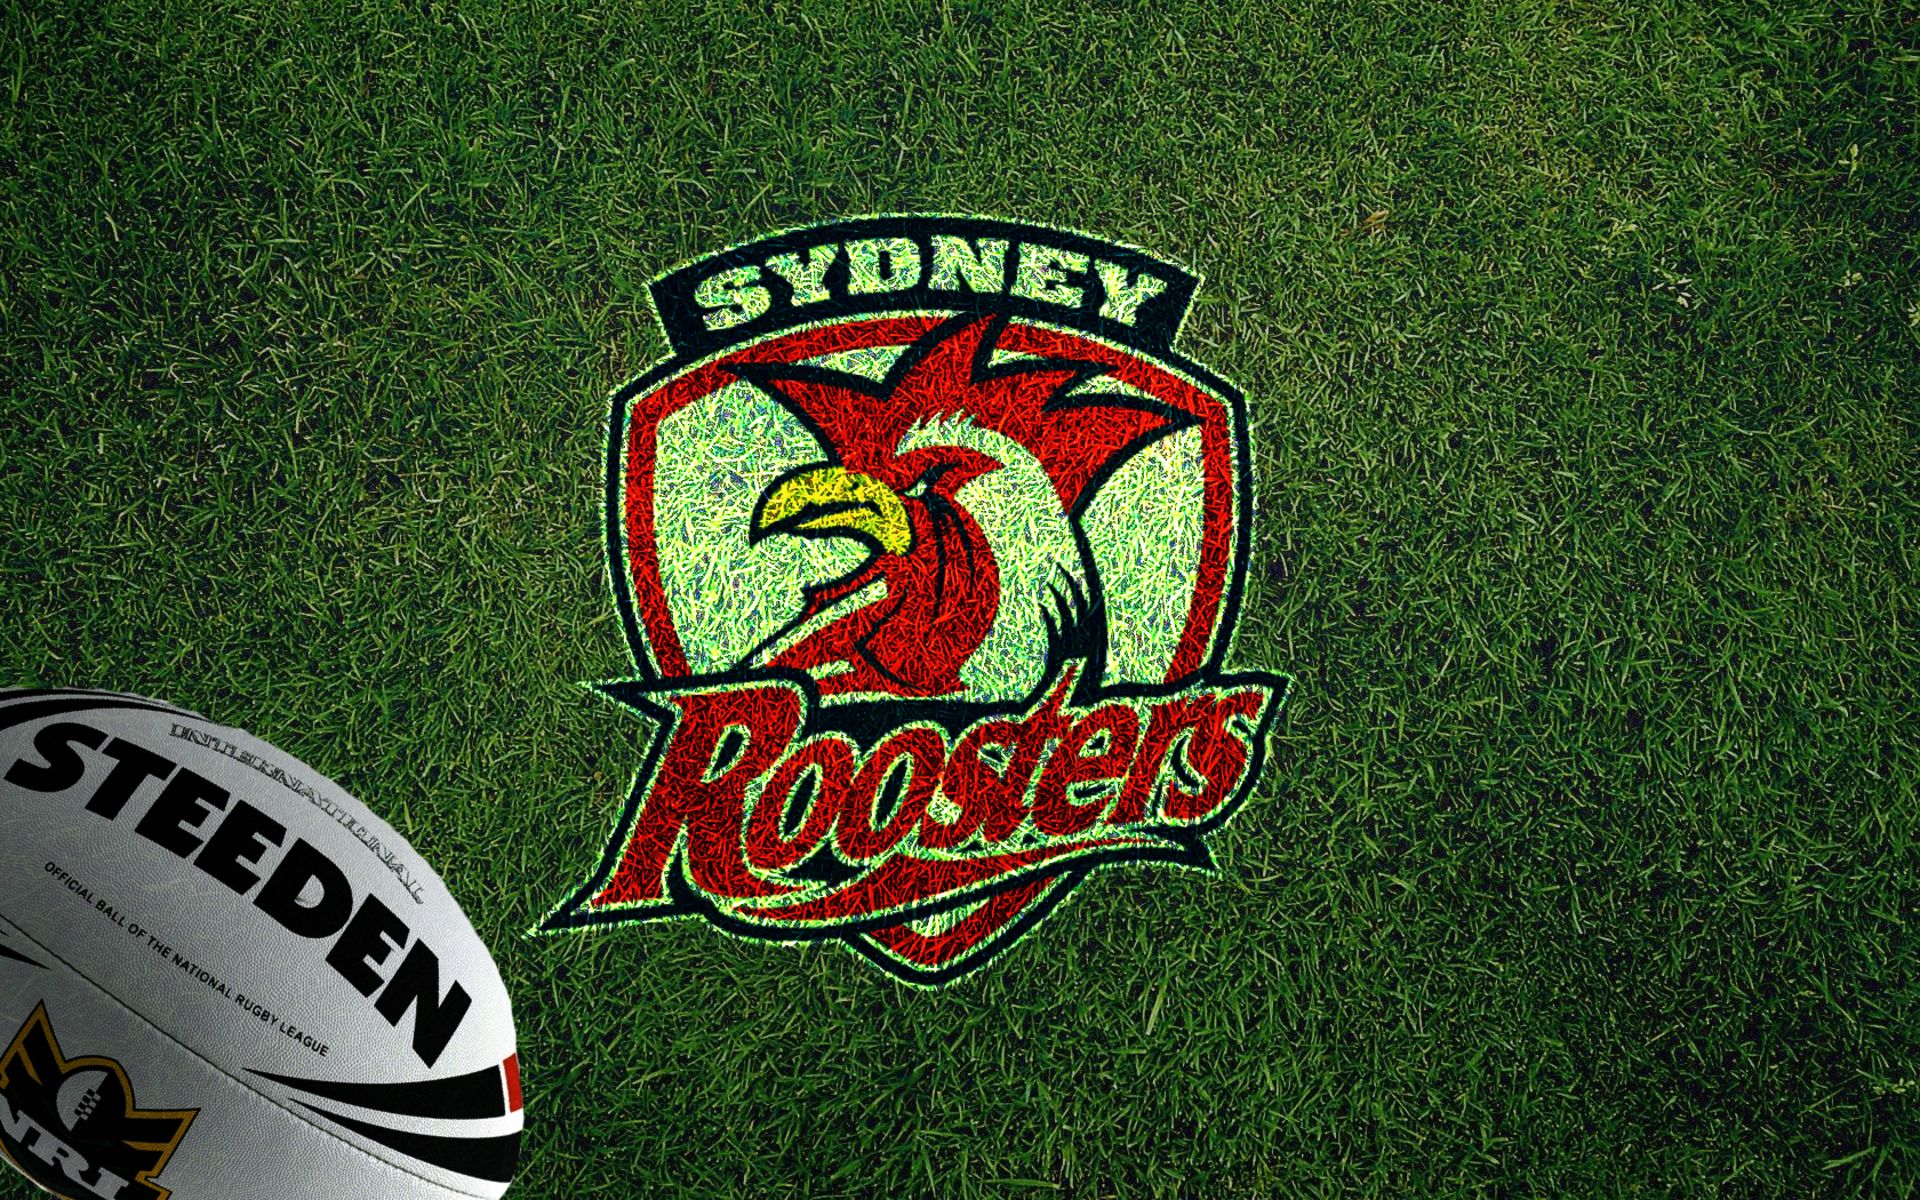 sydney roosters, sports, logo, national rugby league, nrl, rugby